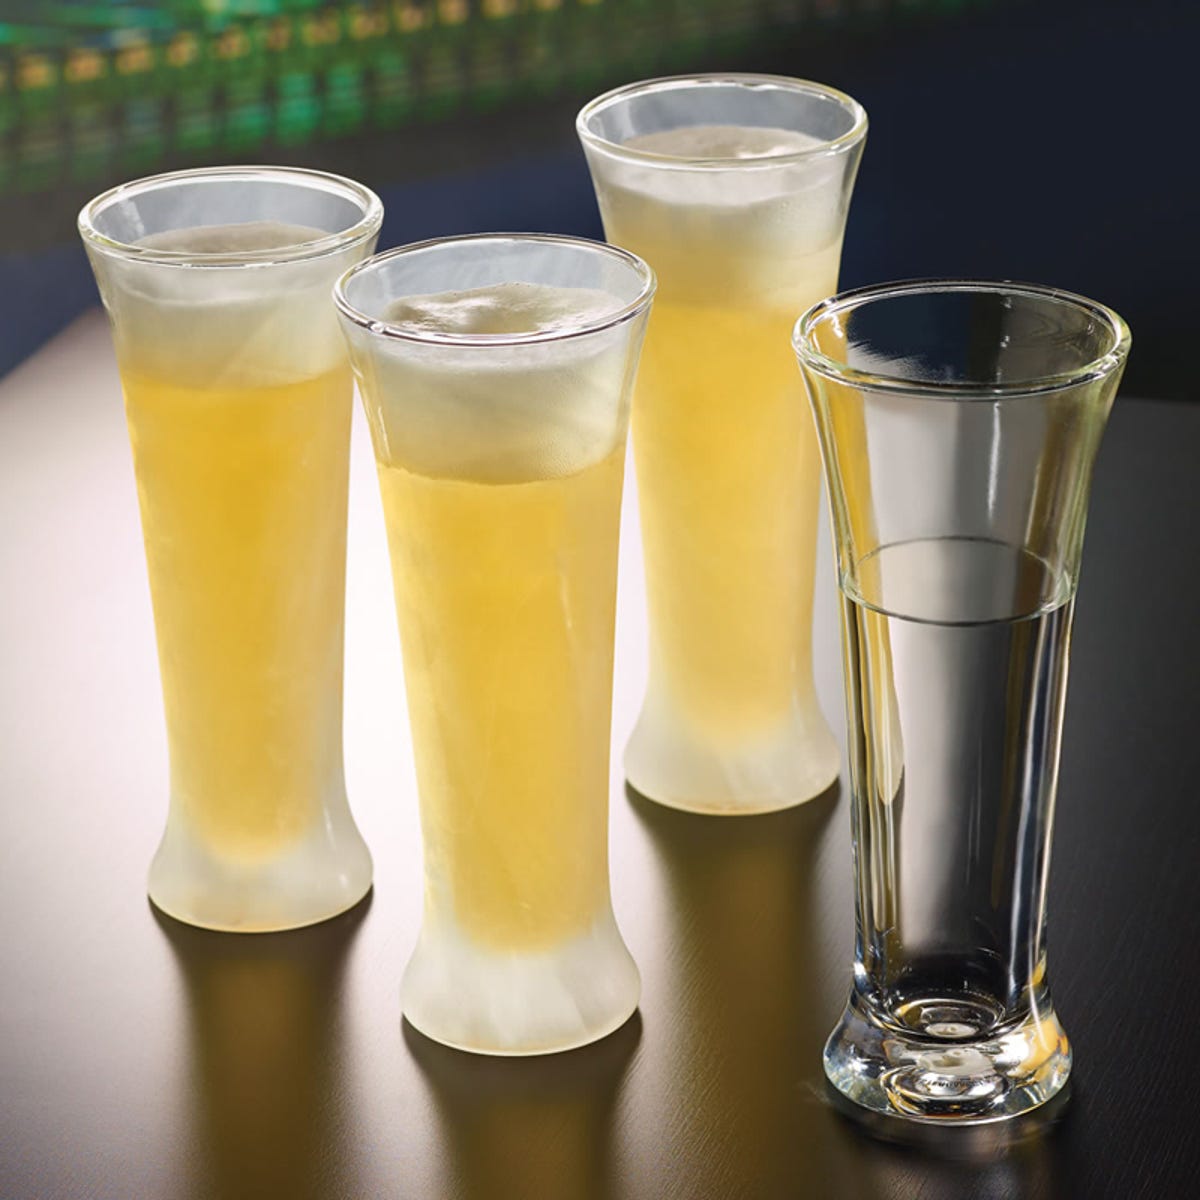 The Chill Maintaining Pilsner Glasses are a practical item available from Hammacher Schlemmer.